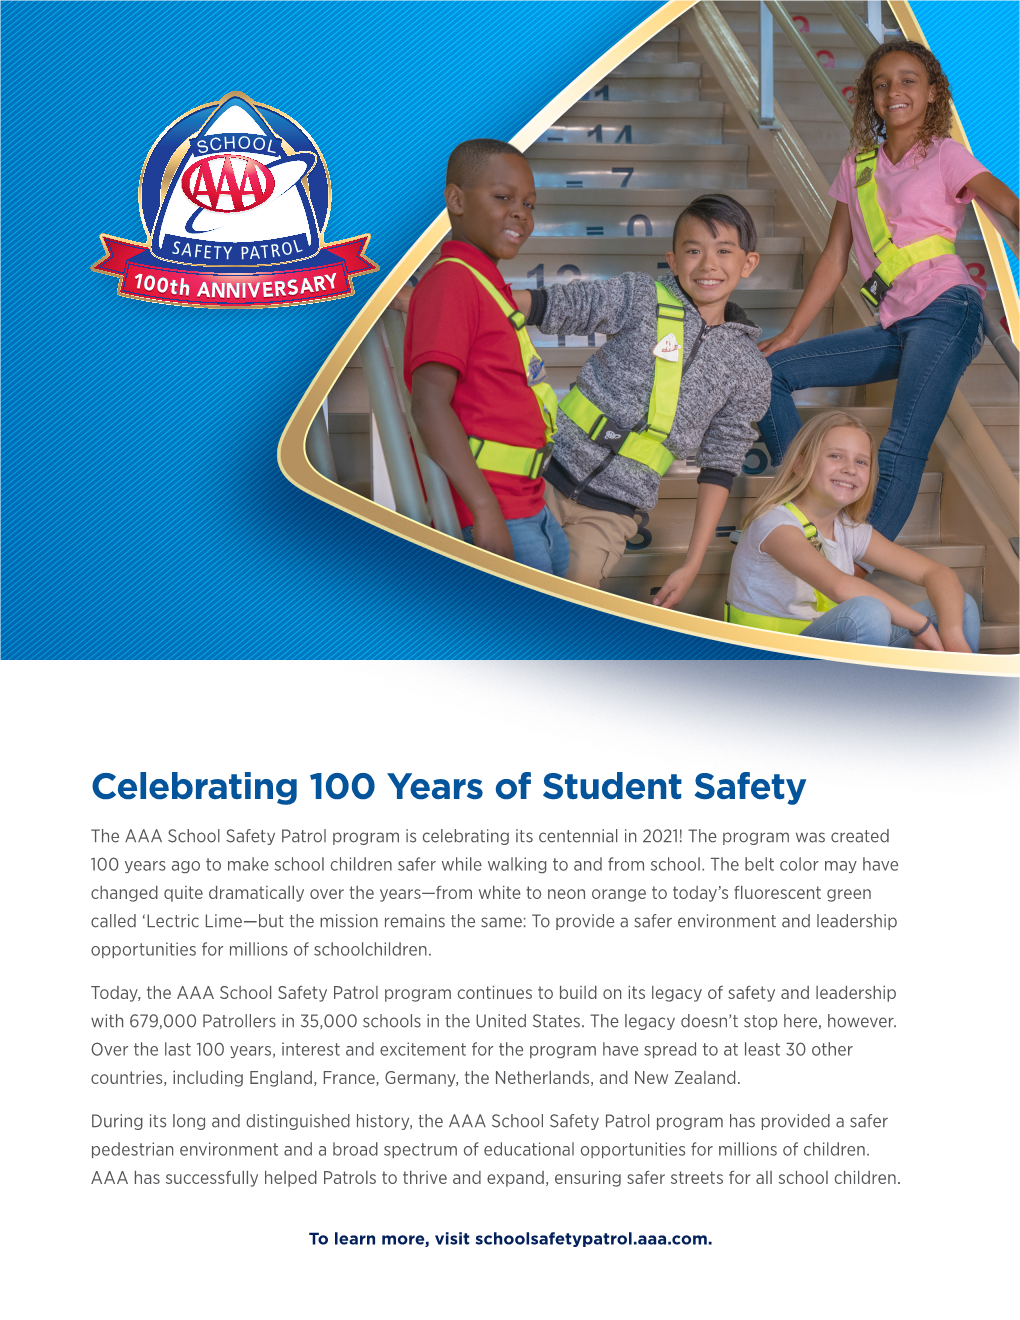 Celebrating 100 Years of Student Safety